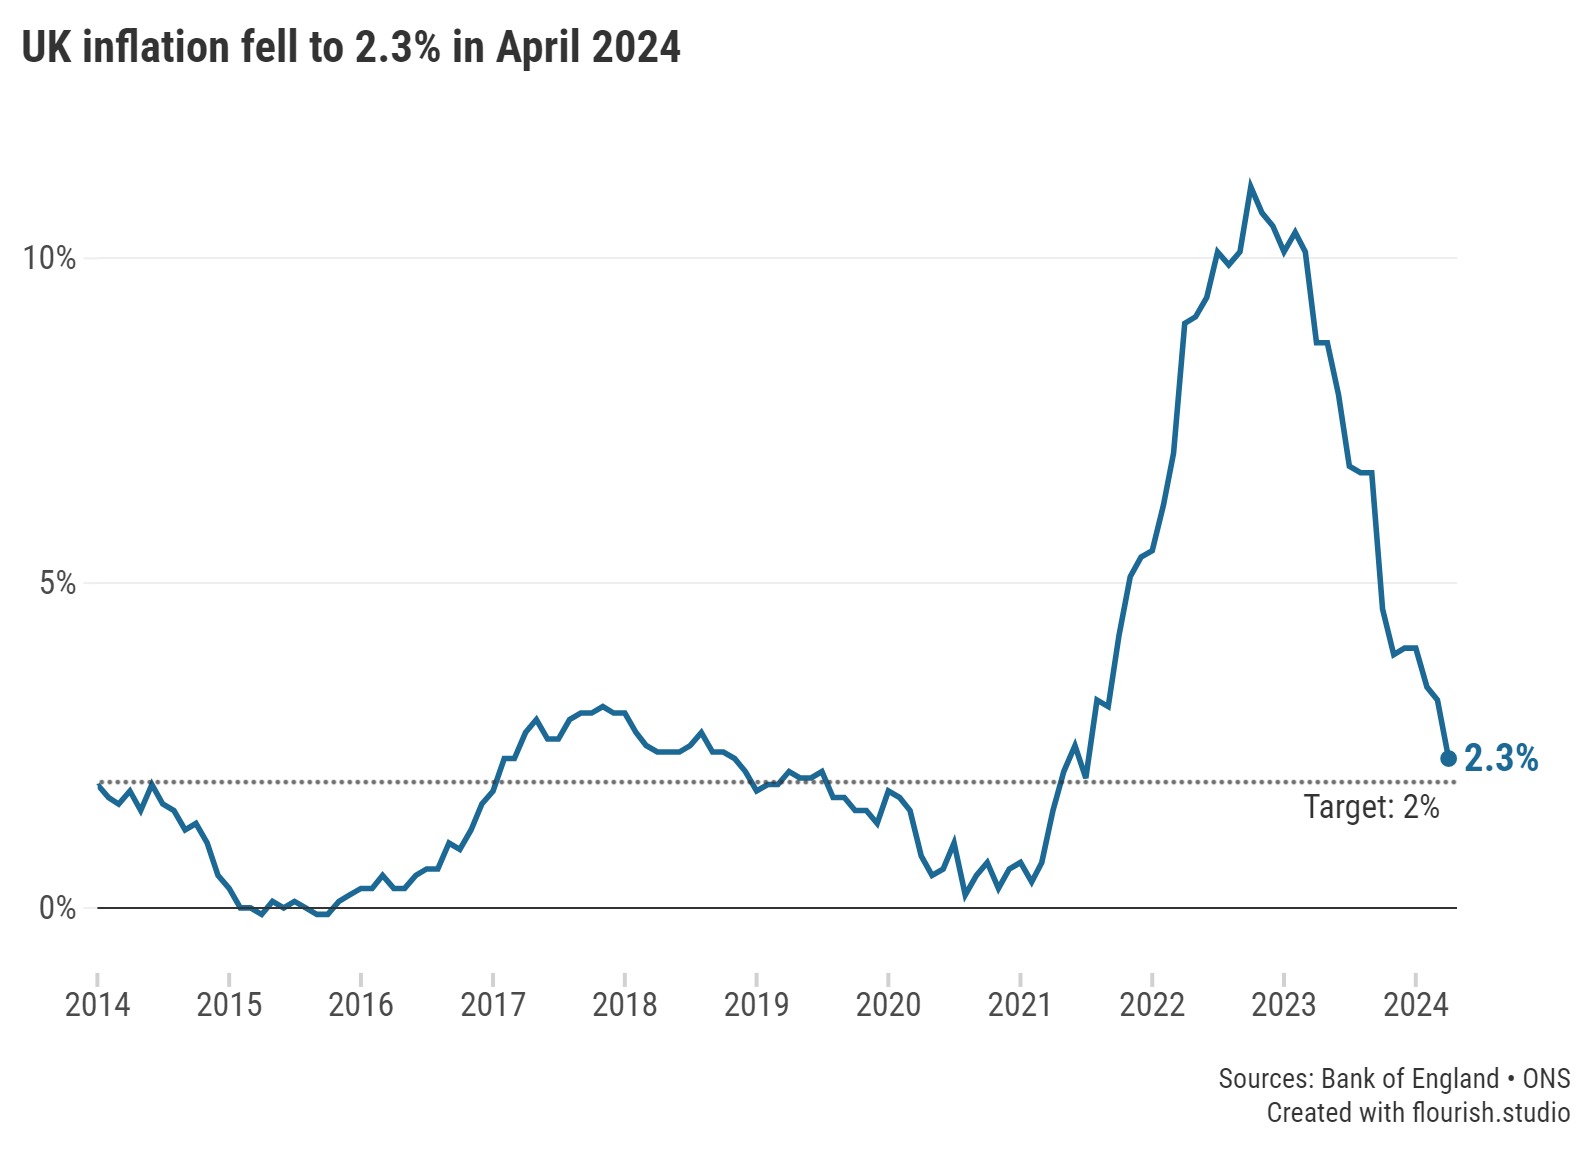 Graph showing UK inflation in April 2024 compared to the Bank of England's target